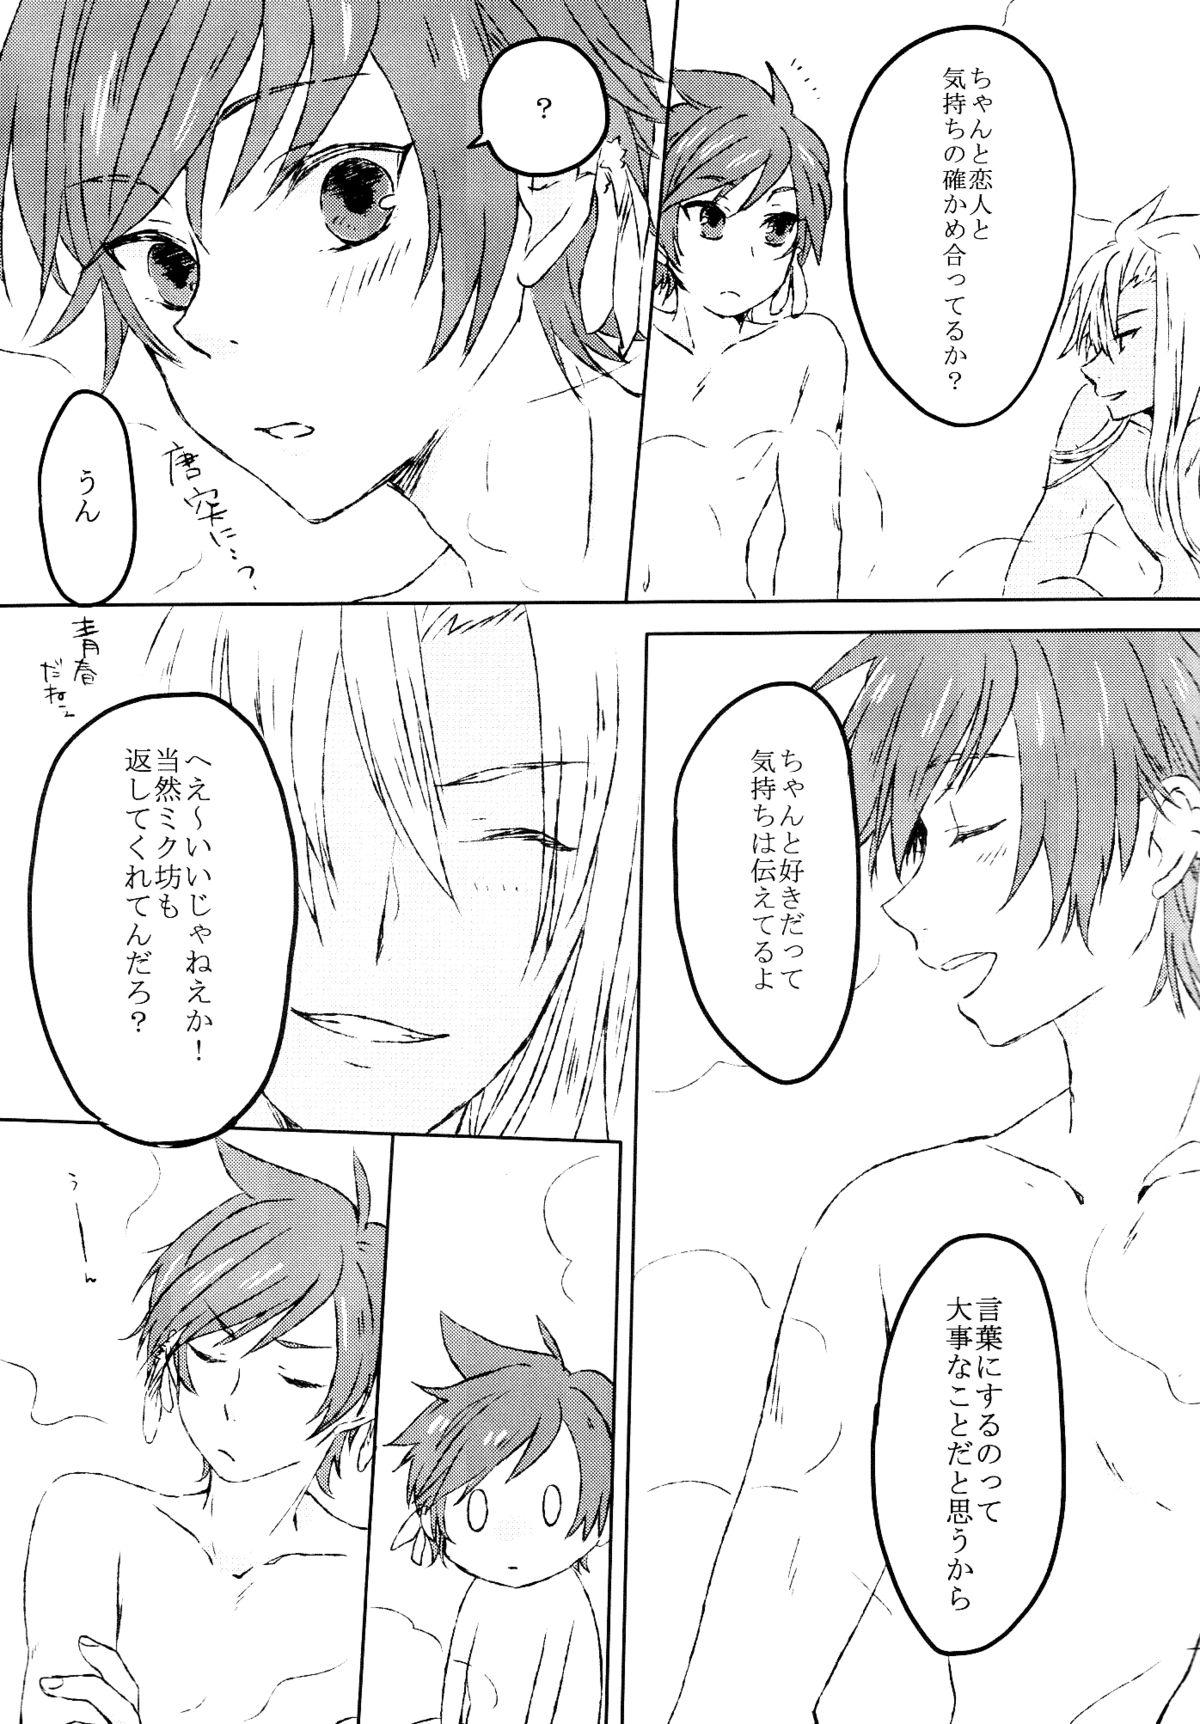 Brazzers Chiguhagu Syndrome - Tales of zestiria Jerking Off - Page 6